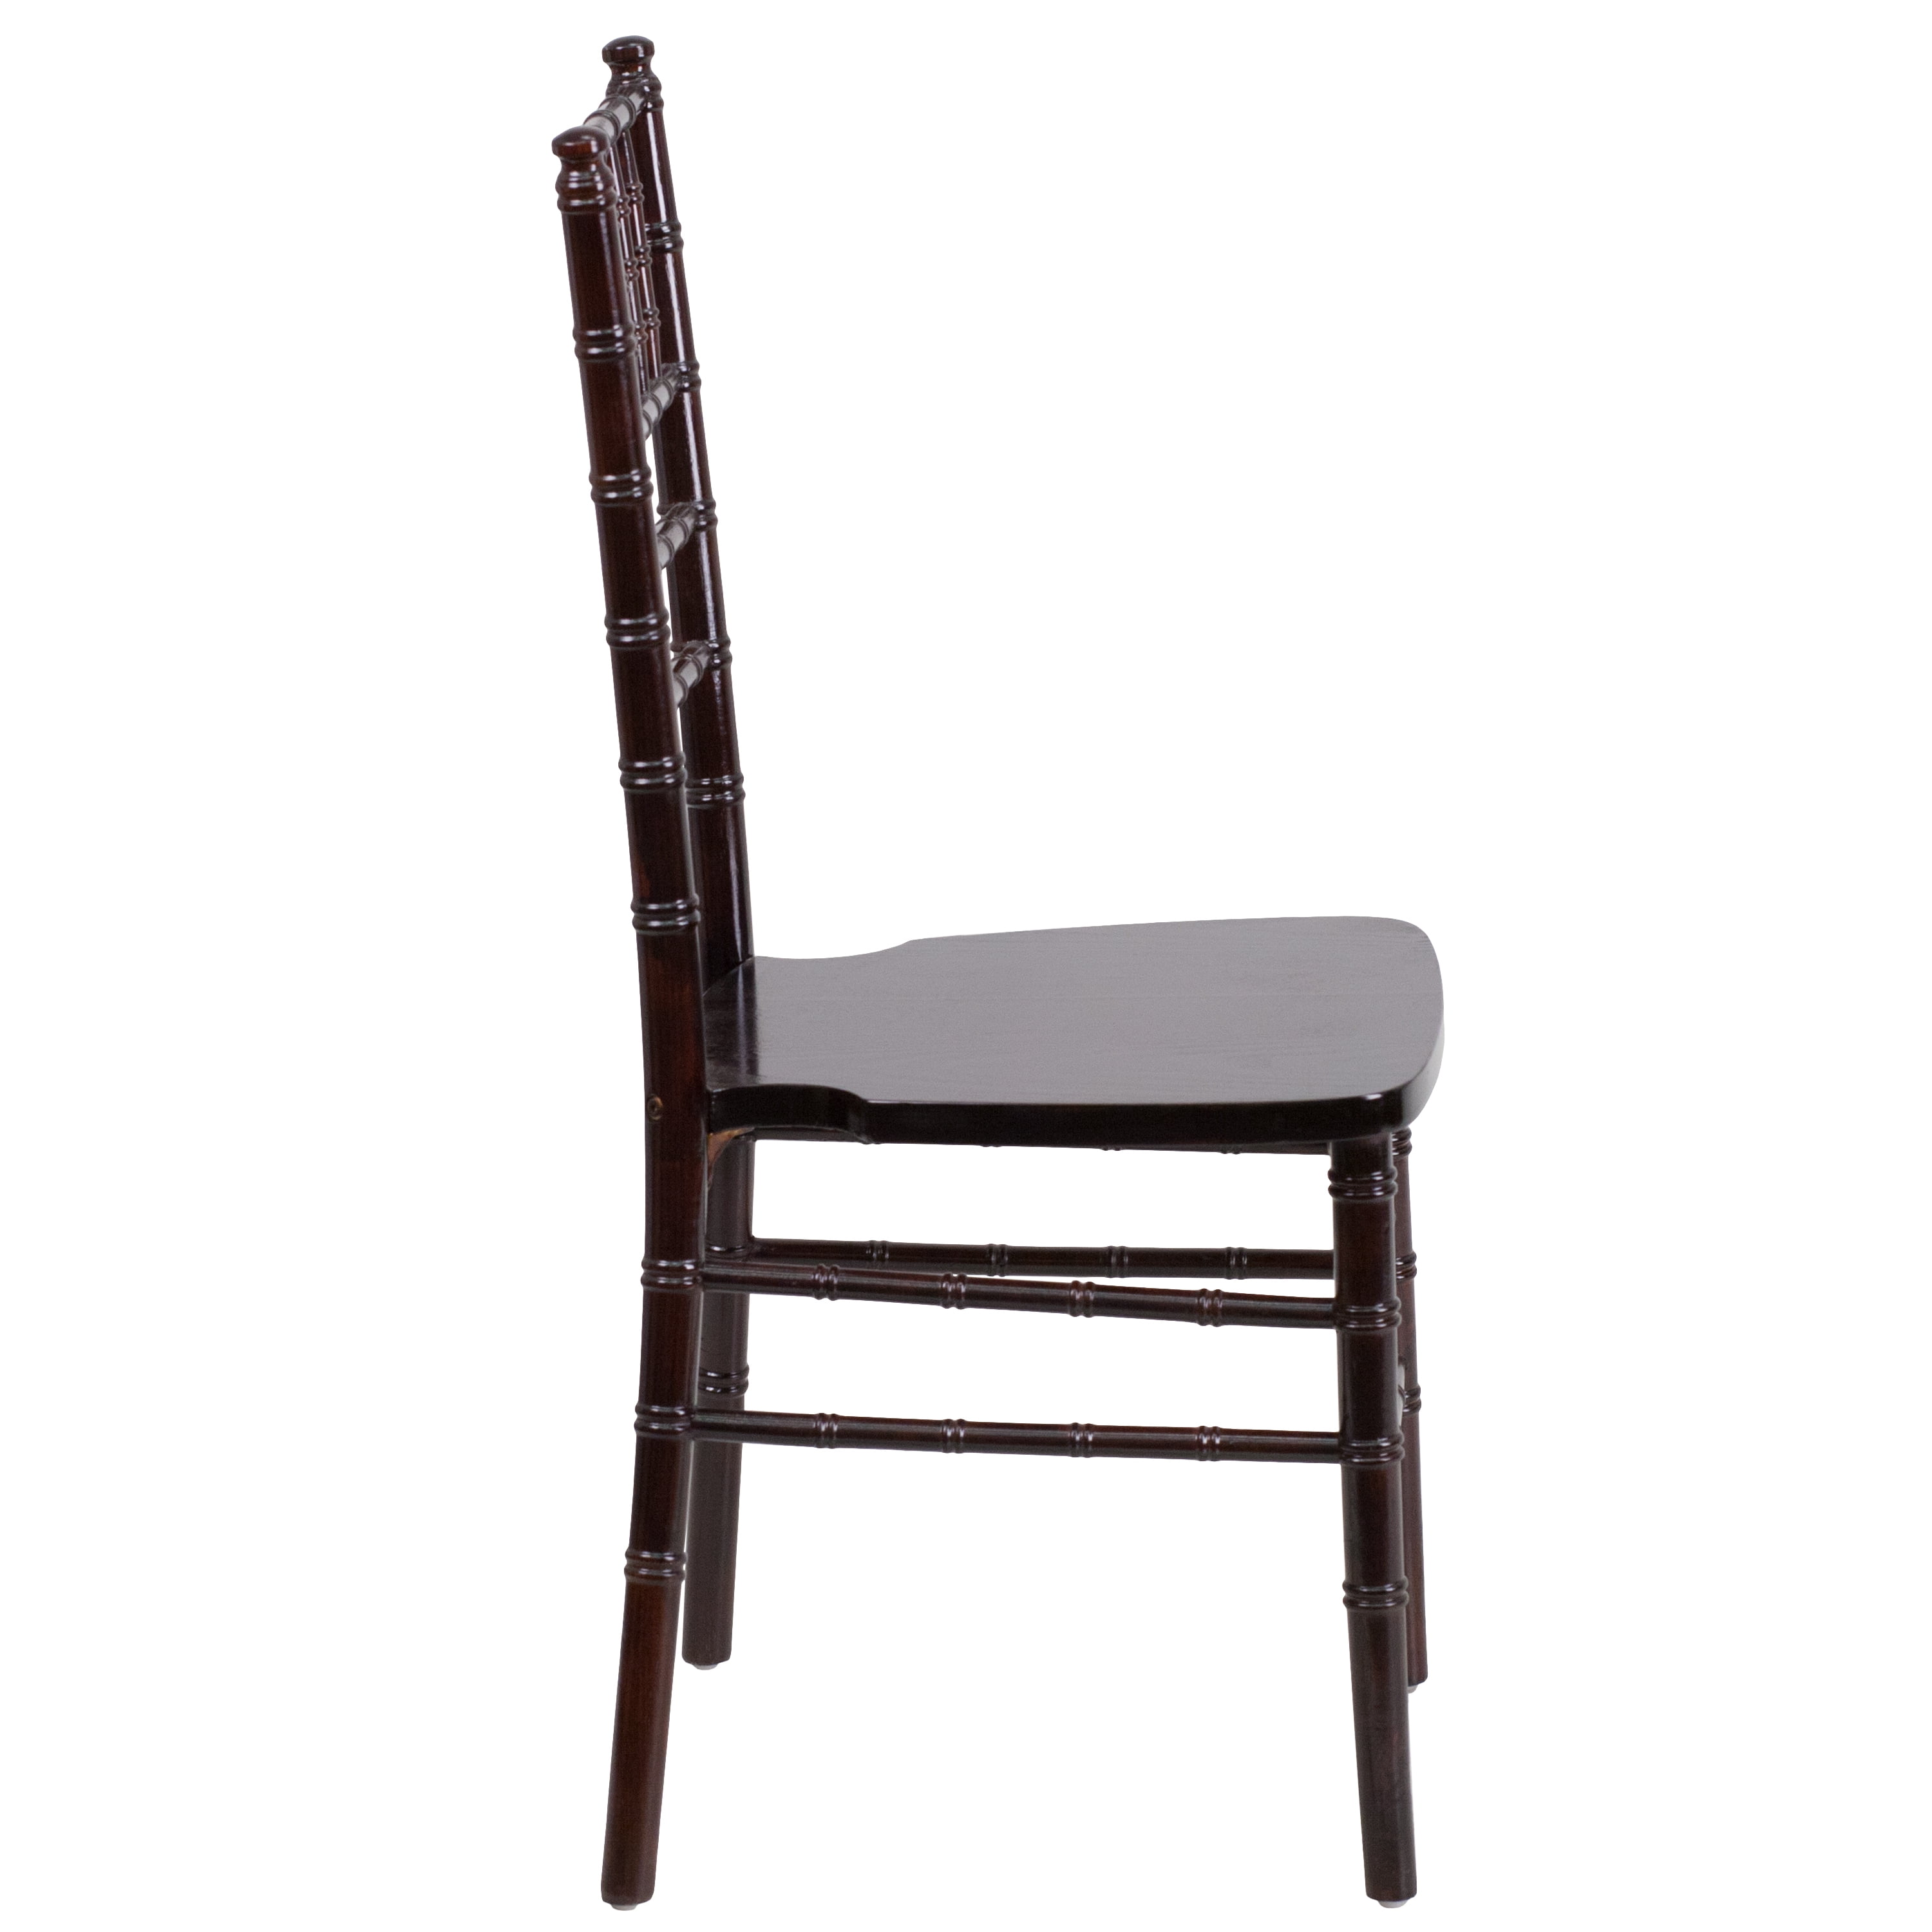 Hercules Series Wood Classically Styled Chiavari Chair Black Riverstone Furniture Collection 